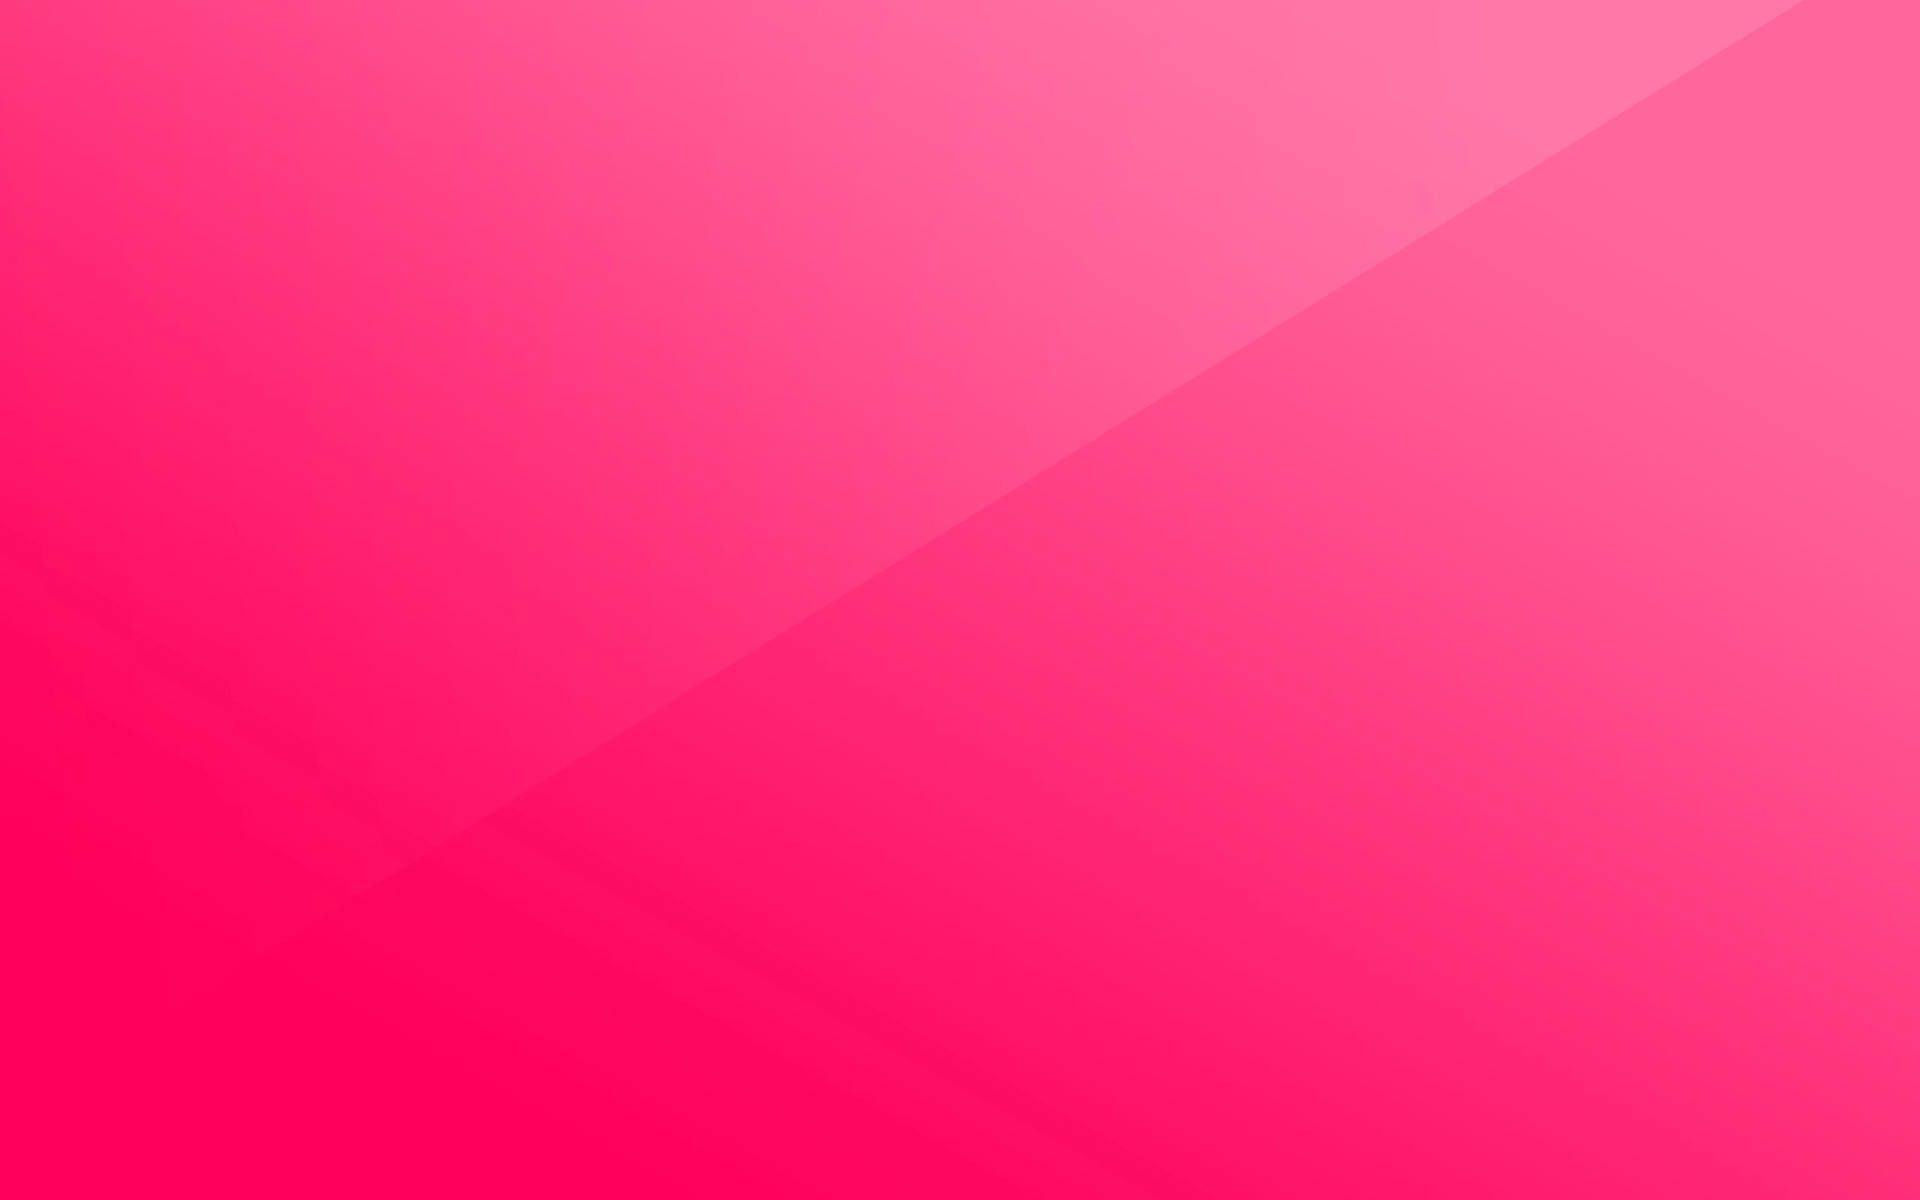 This vibrant pink gradient soothes the soul and warms the heart. Wallpaper